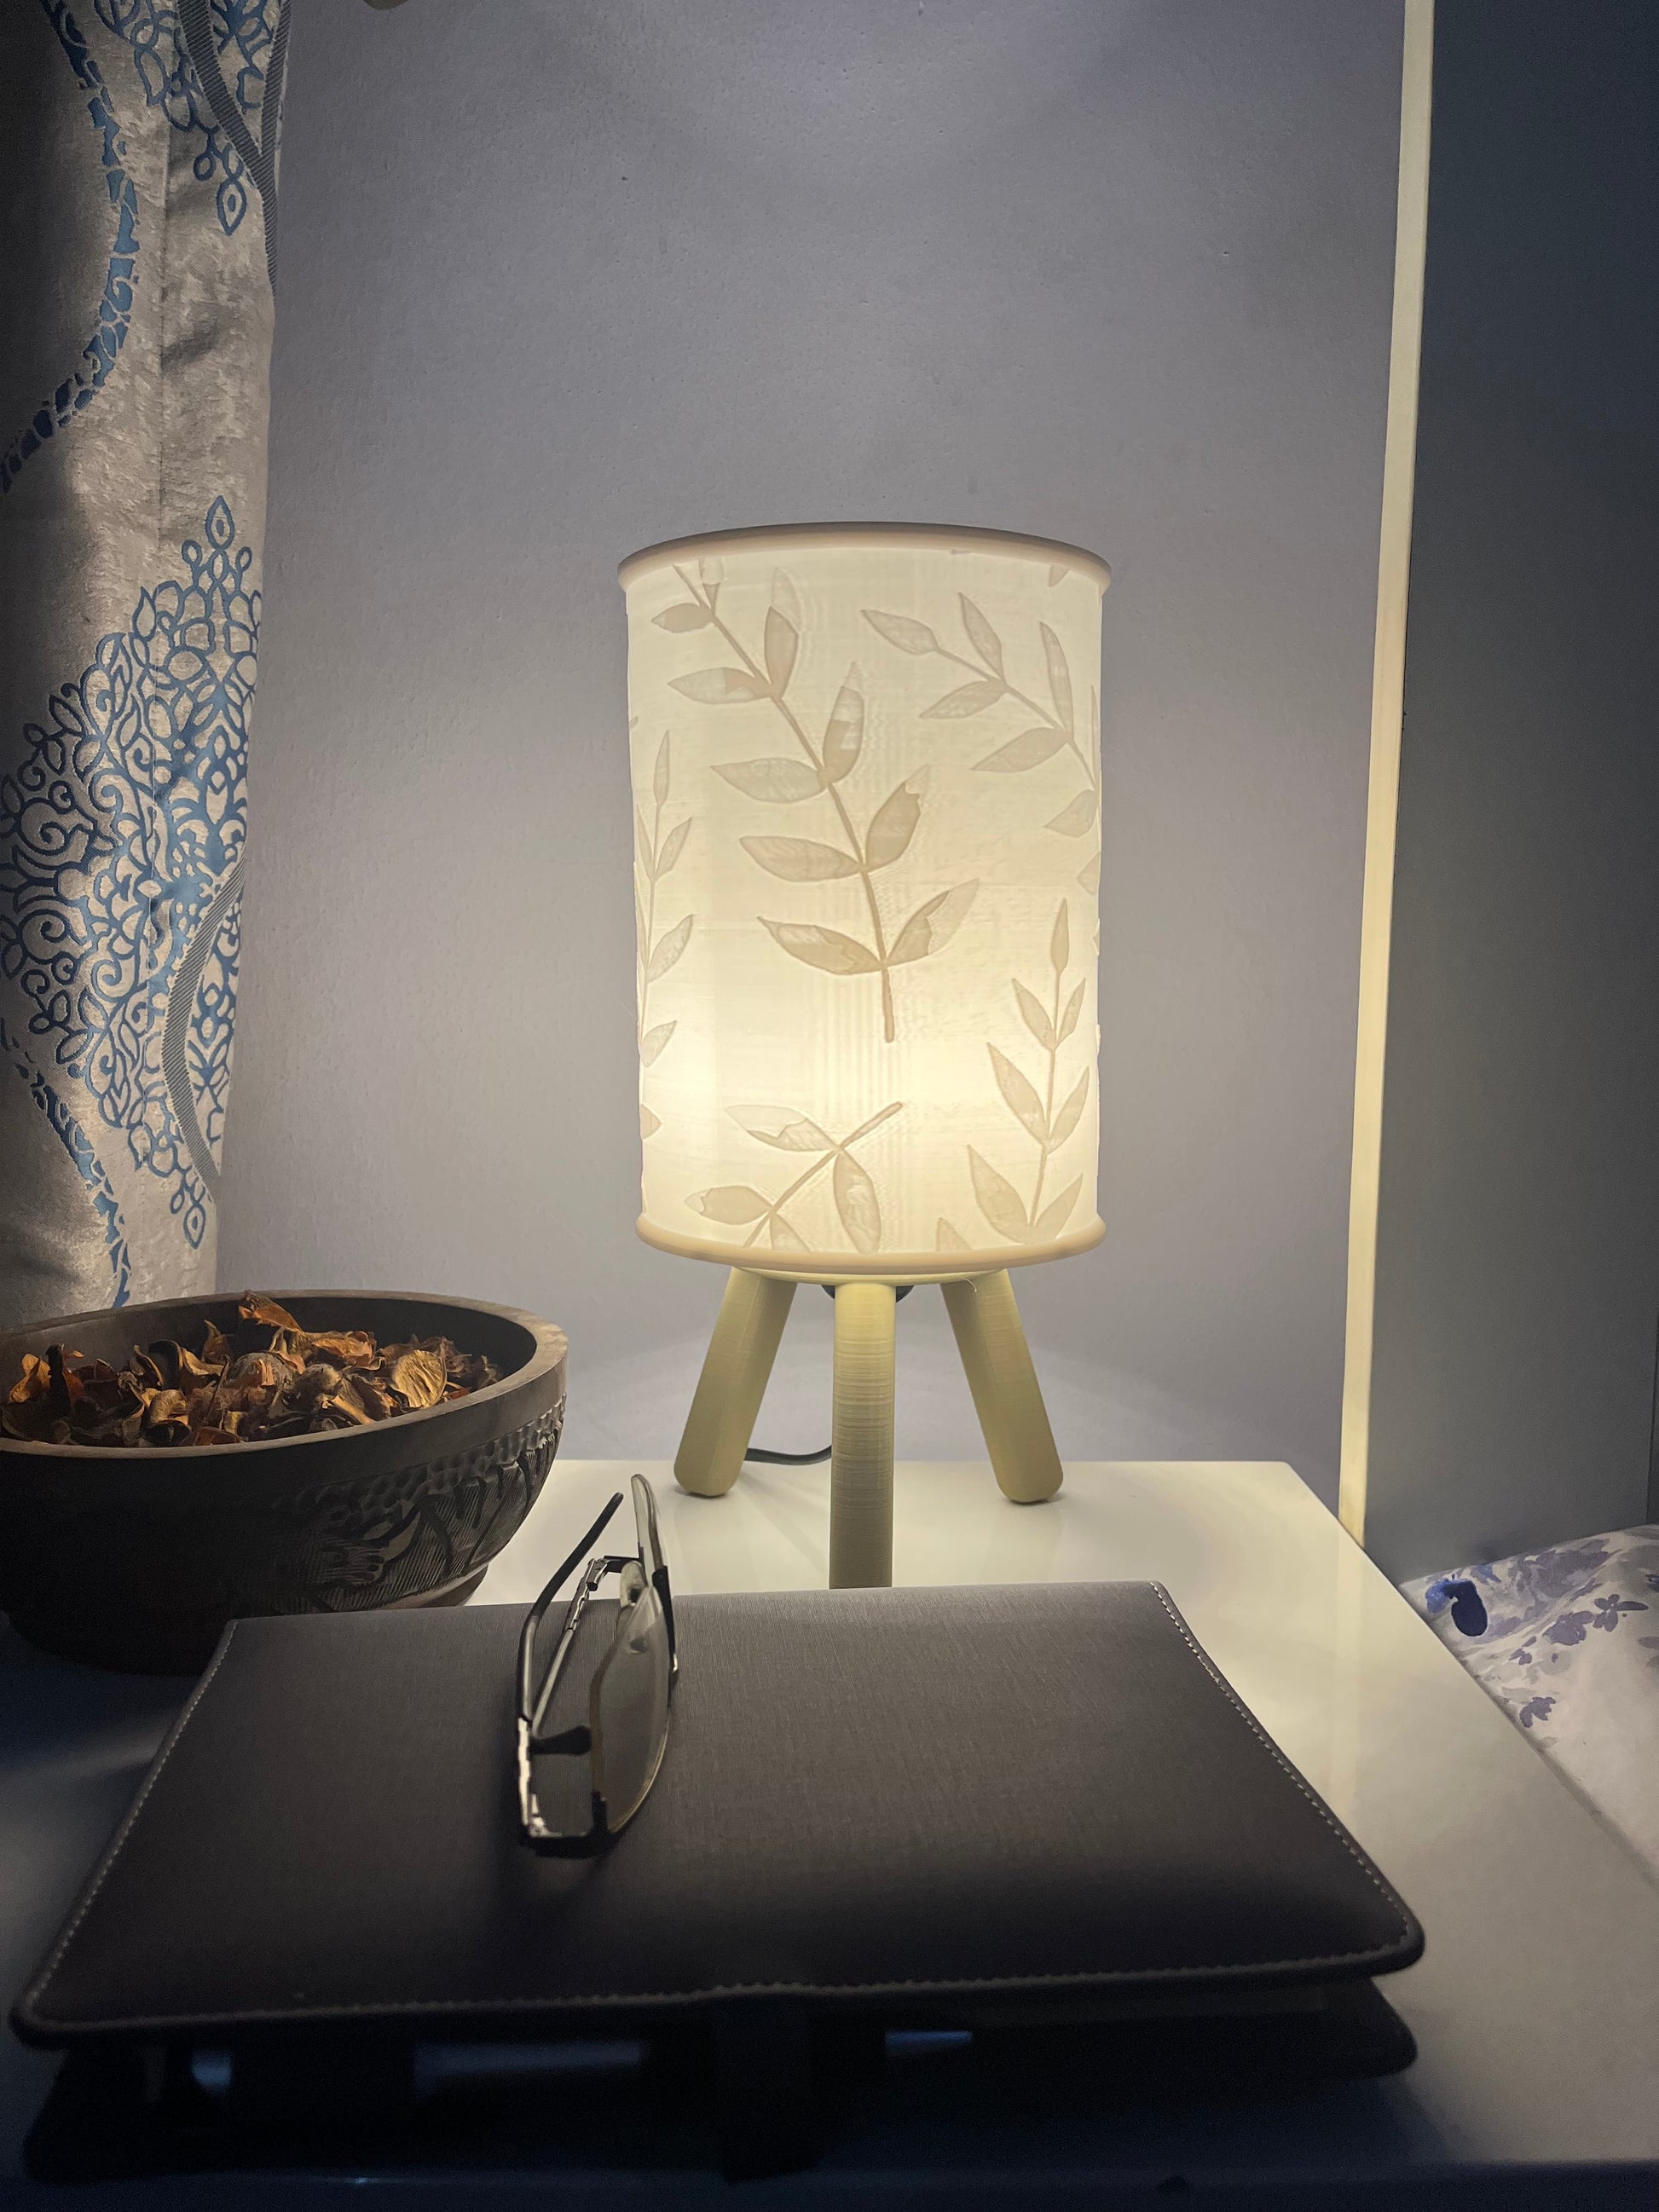 3D printed burlywood Hako bedside/table lamp on a bedside table